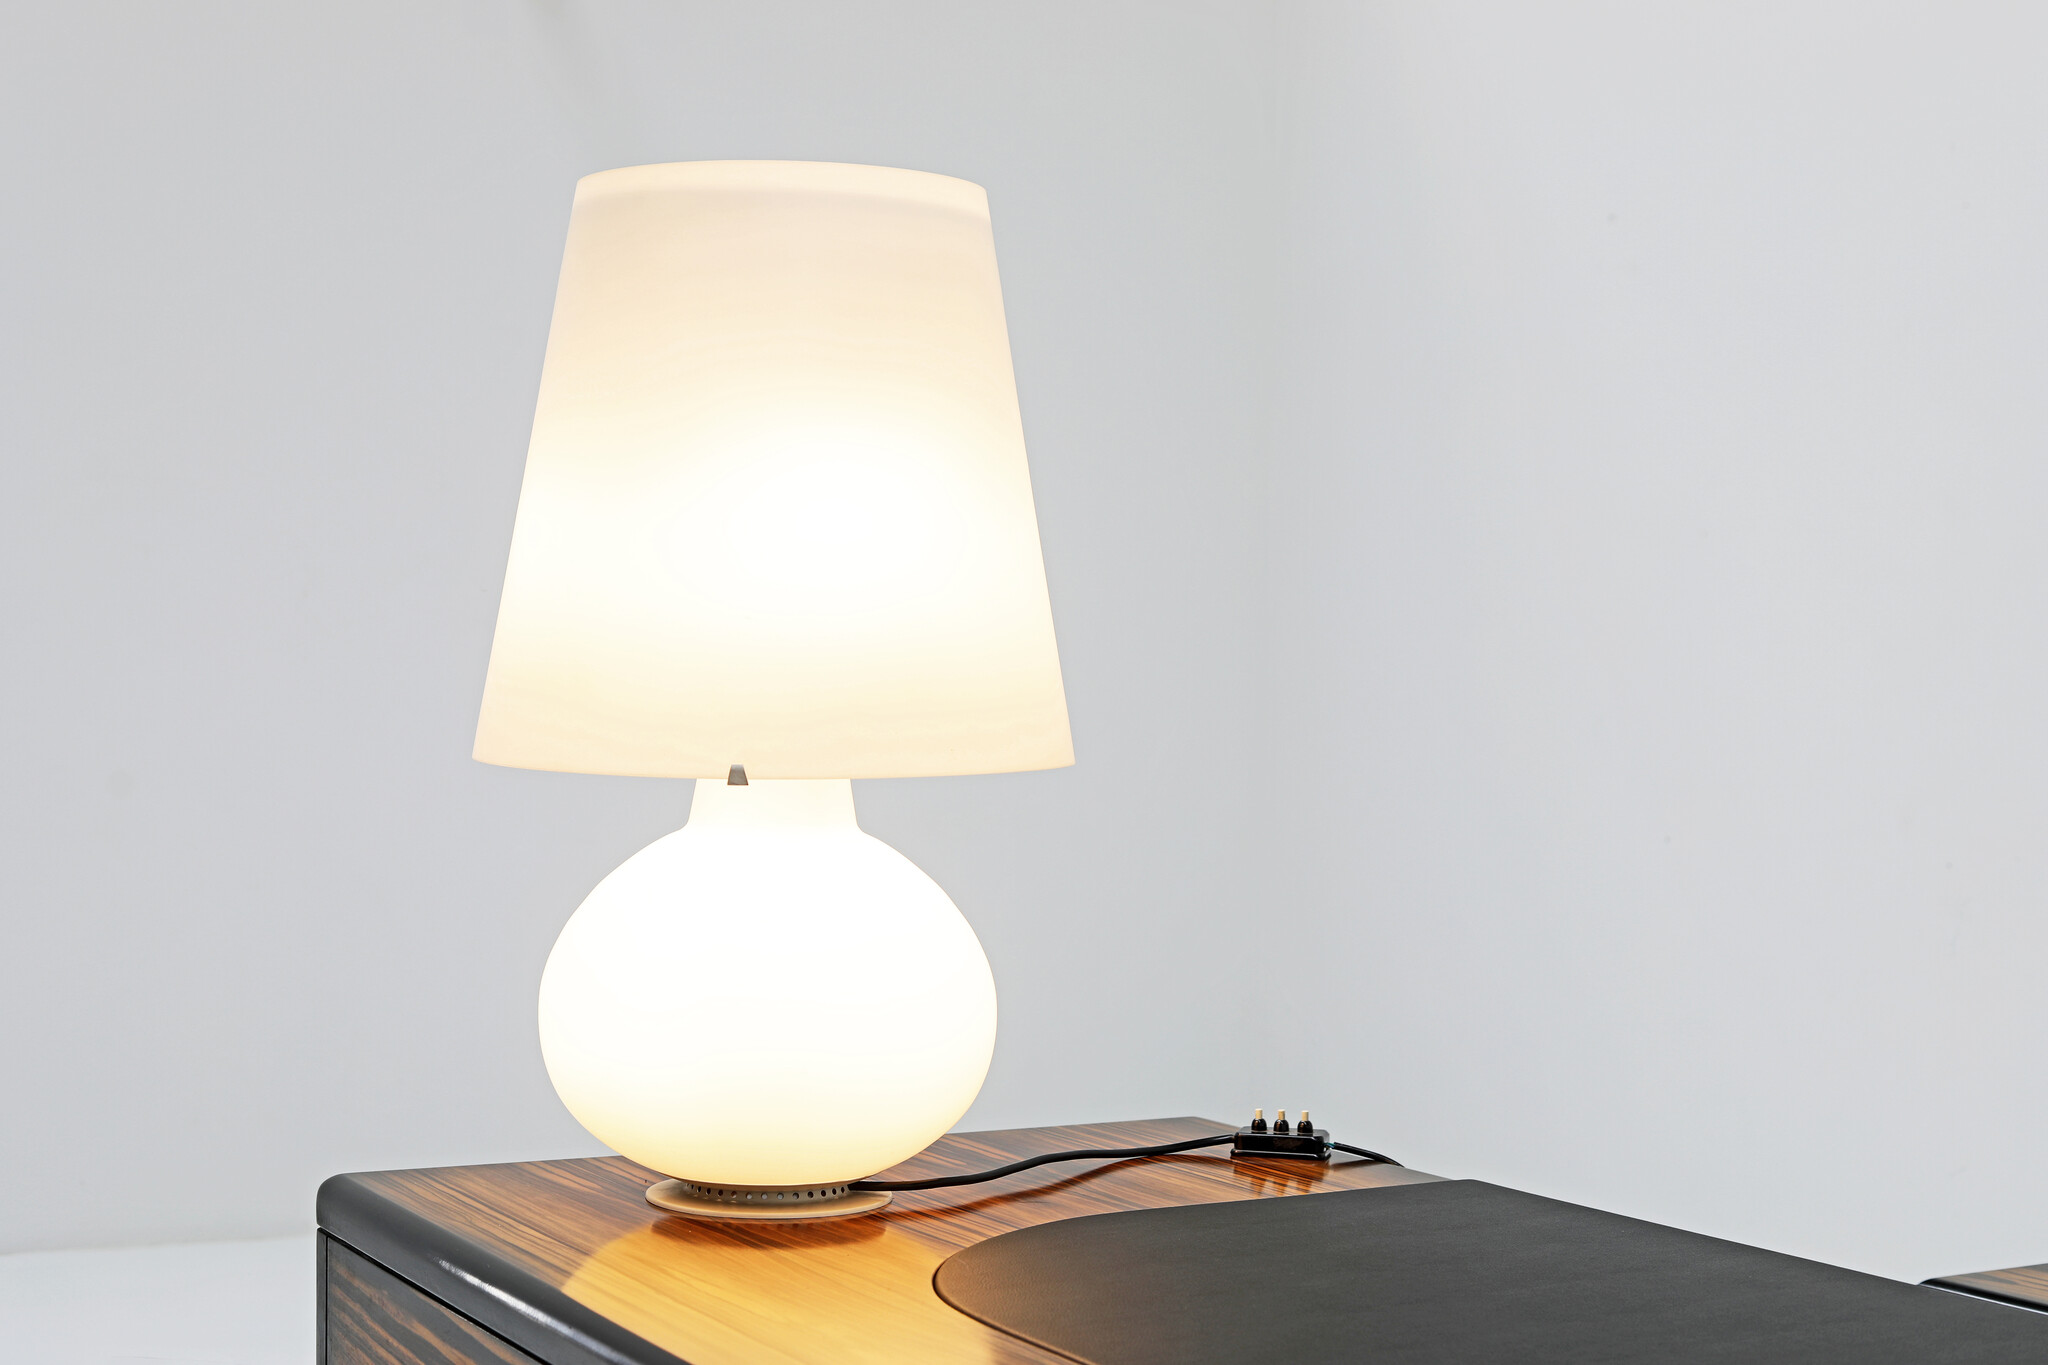 Large table lamp by Max Ingrand for Fontana Arte